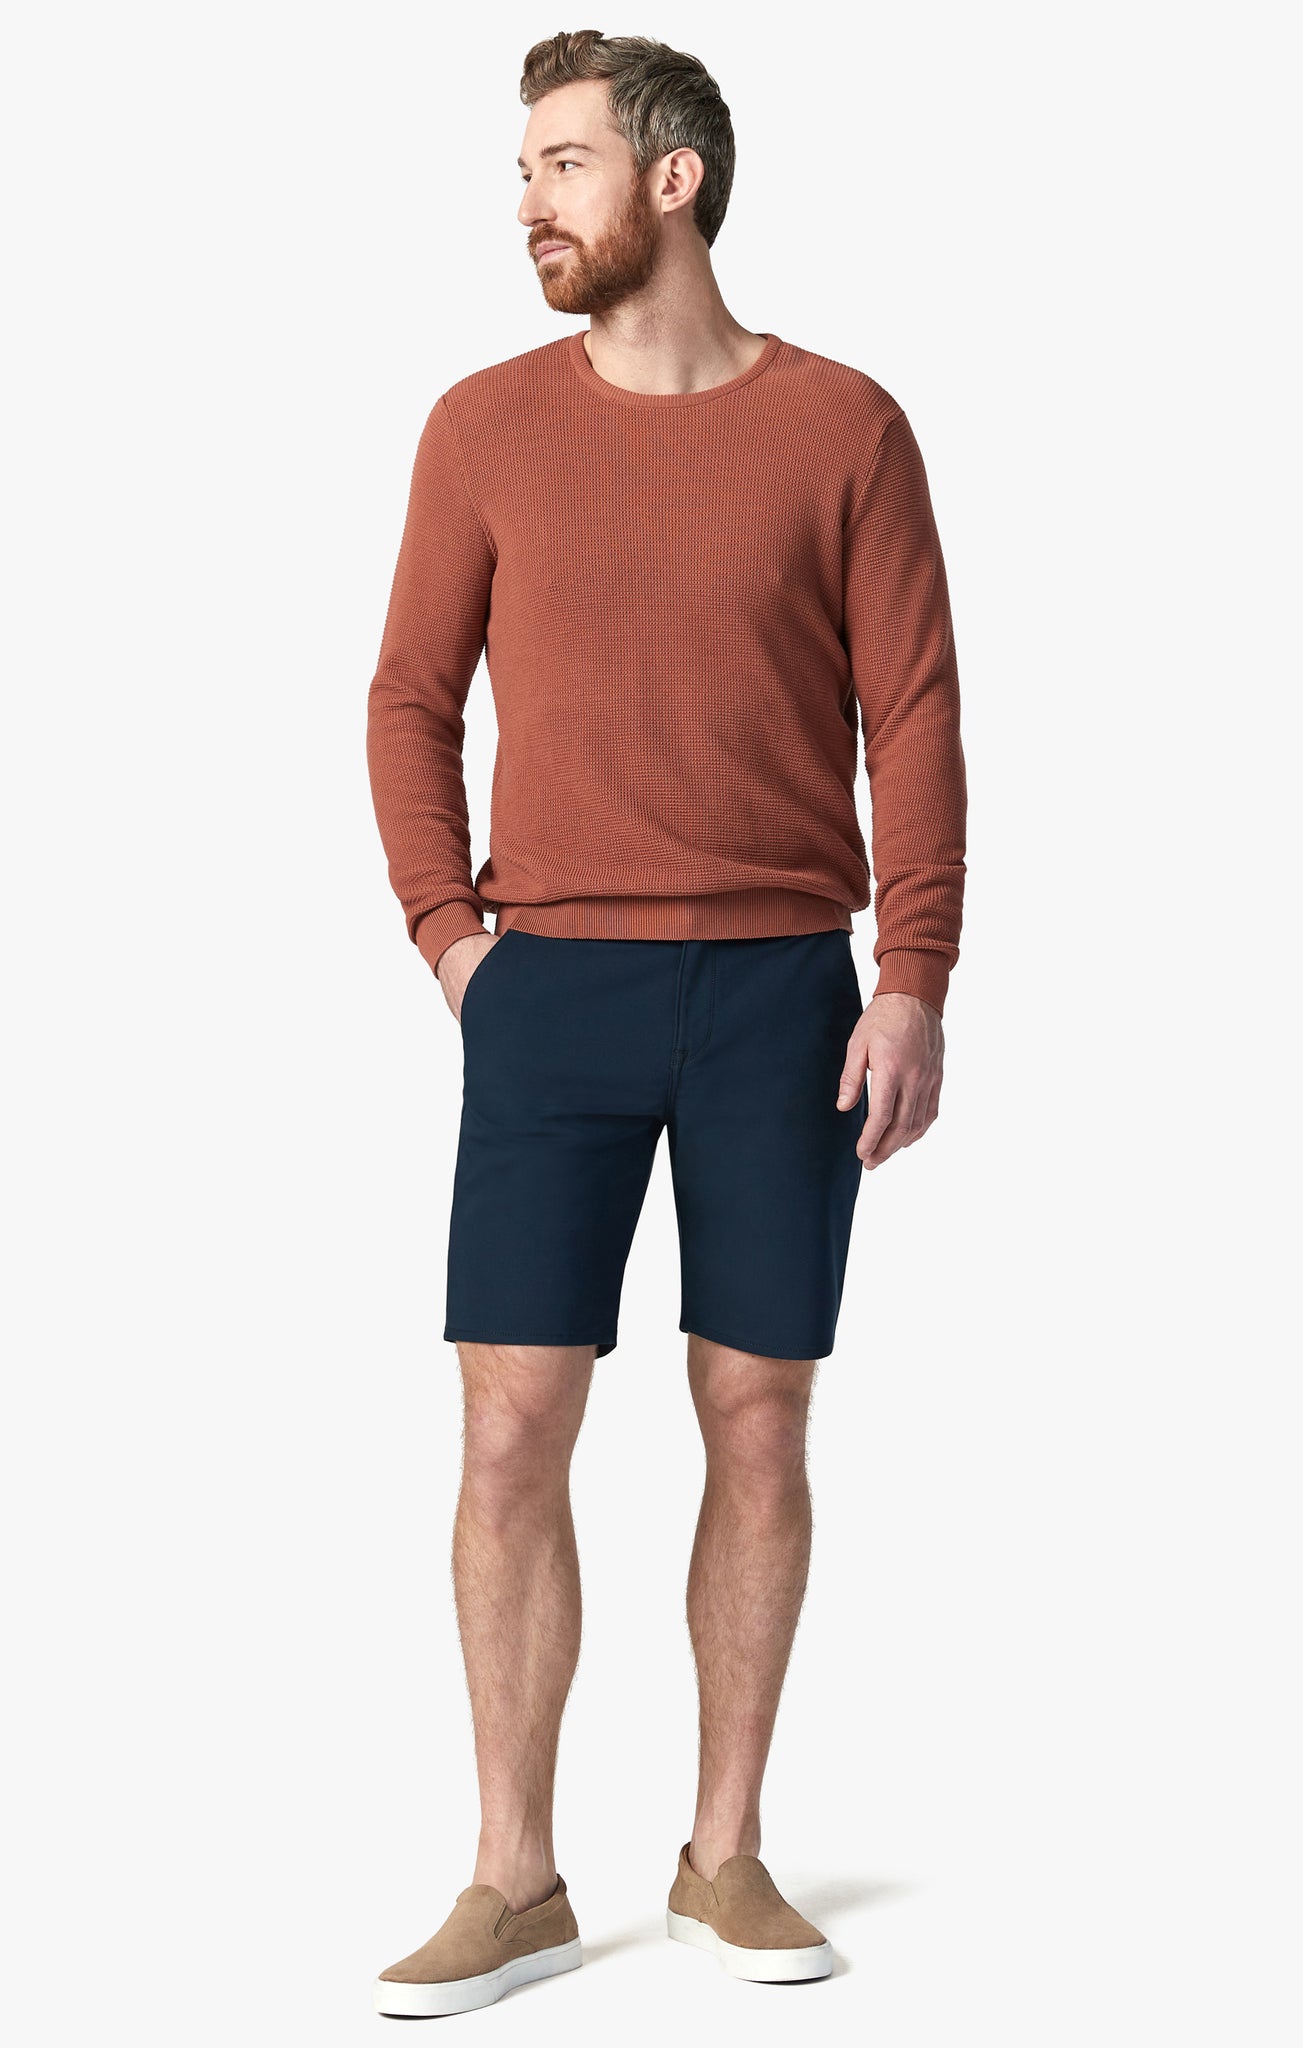 Como Shorts in Navy Commuter